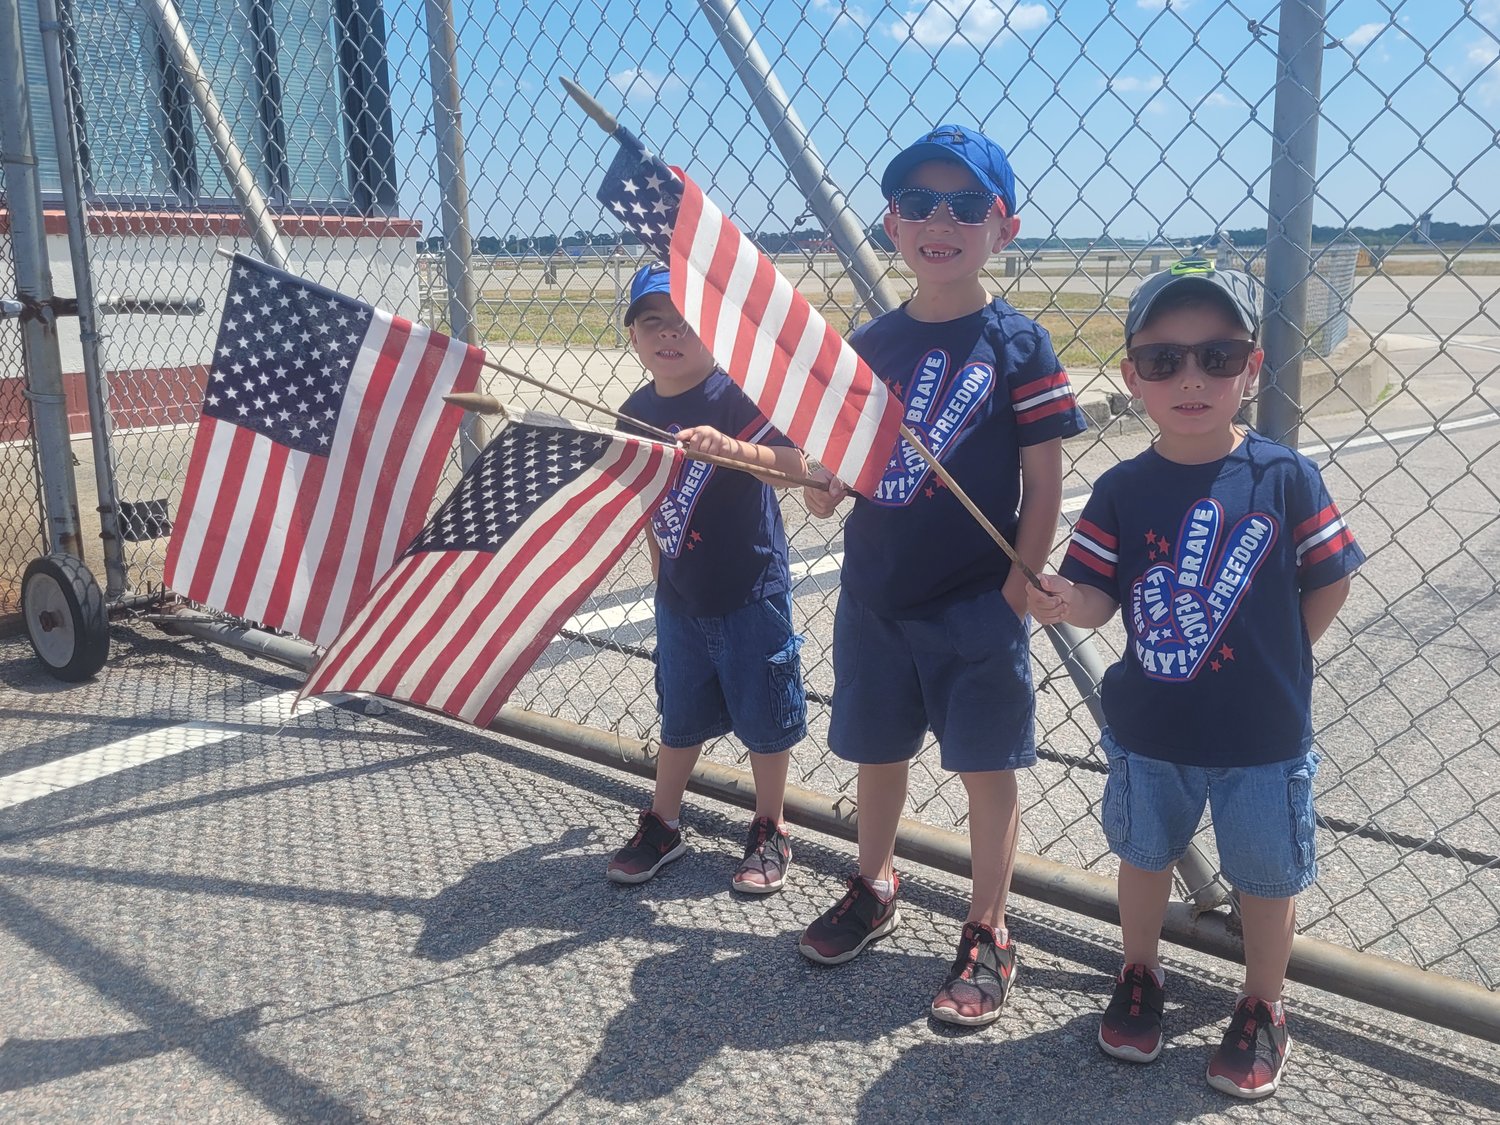 LITTLE PATRIOTS: Levi, 4, Cole, 6, and Rome, 4, stood with their father Trevor Wilson, waving American flags, hoping to catch a glimpse of President Biden